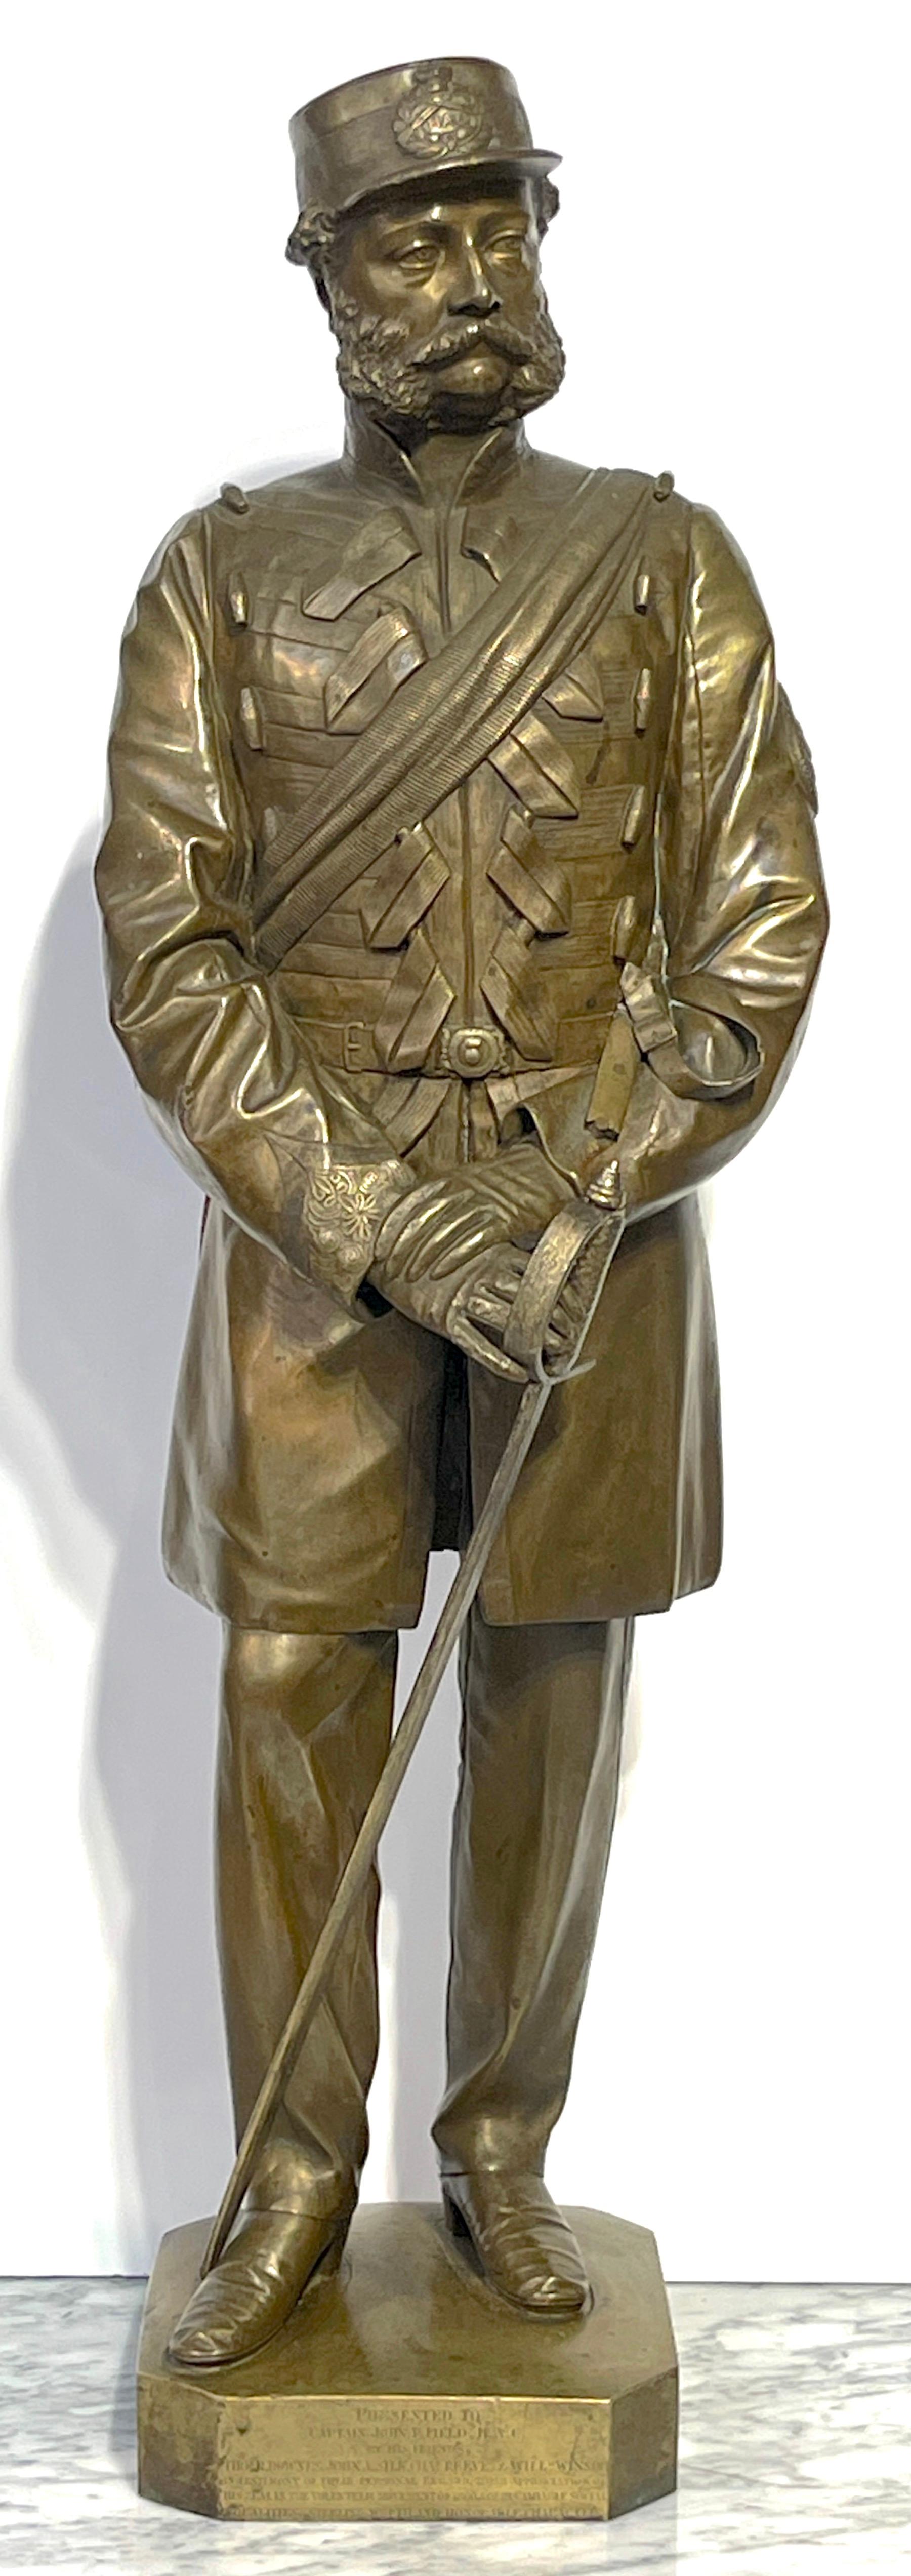 19th Century  English Bronze of a Beloved Soldier of the H.A.C by Thomas Fowke/s
Bronze Standing Figure of Captain John P. Field H.A.C (Honourable Artillery Company)
By Thomas Fowke/s, UK (1829 -1887)  Some Works Exhibited at the Royal Academy